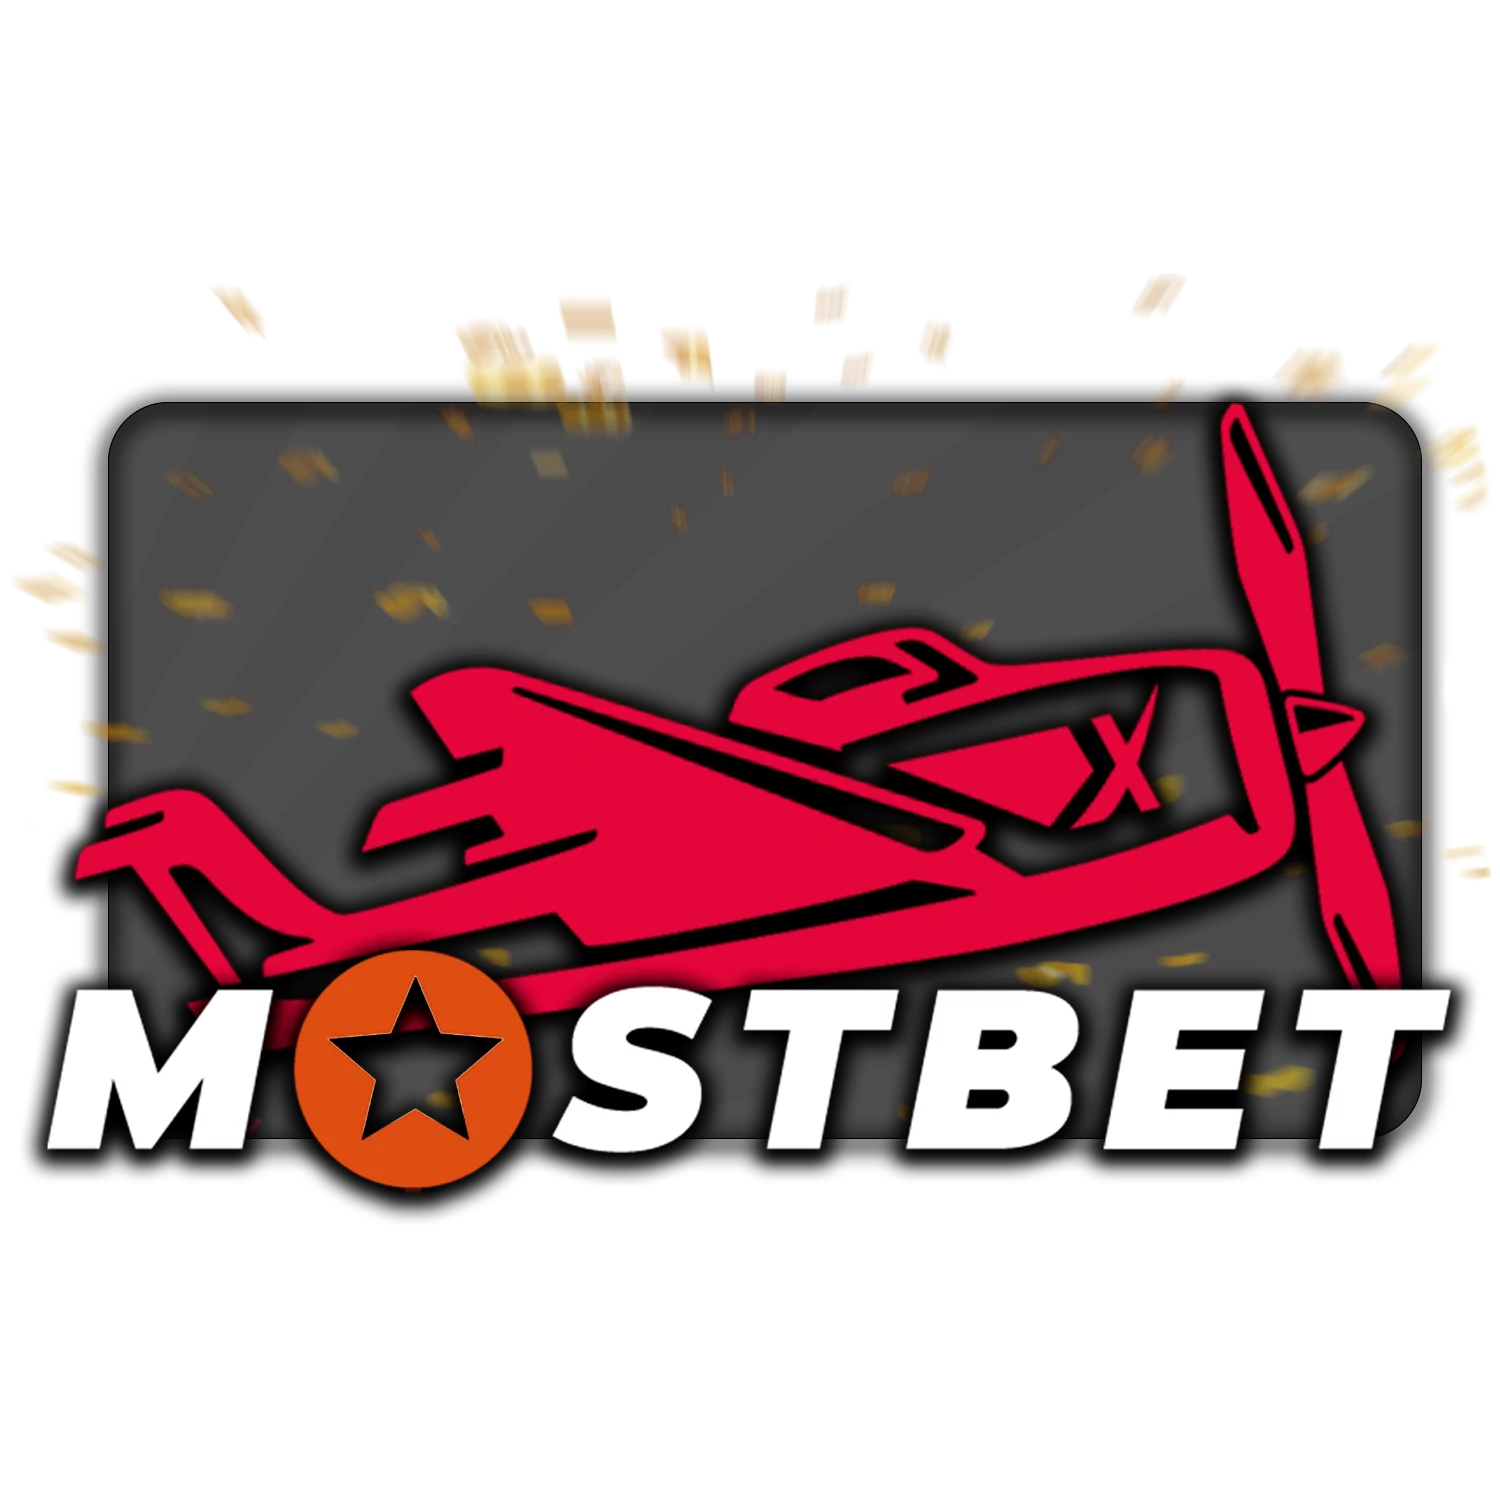 From this article, you learn how to start to place bets in the Mostbet Aviator.